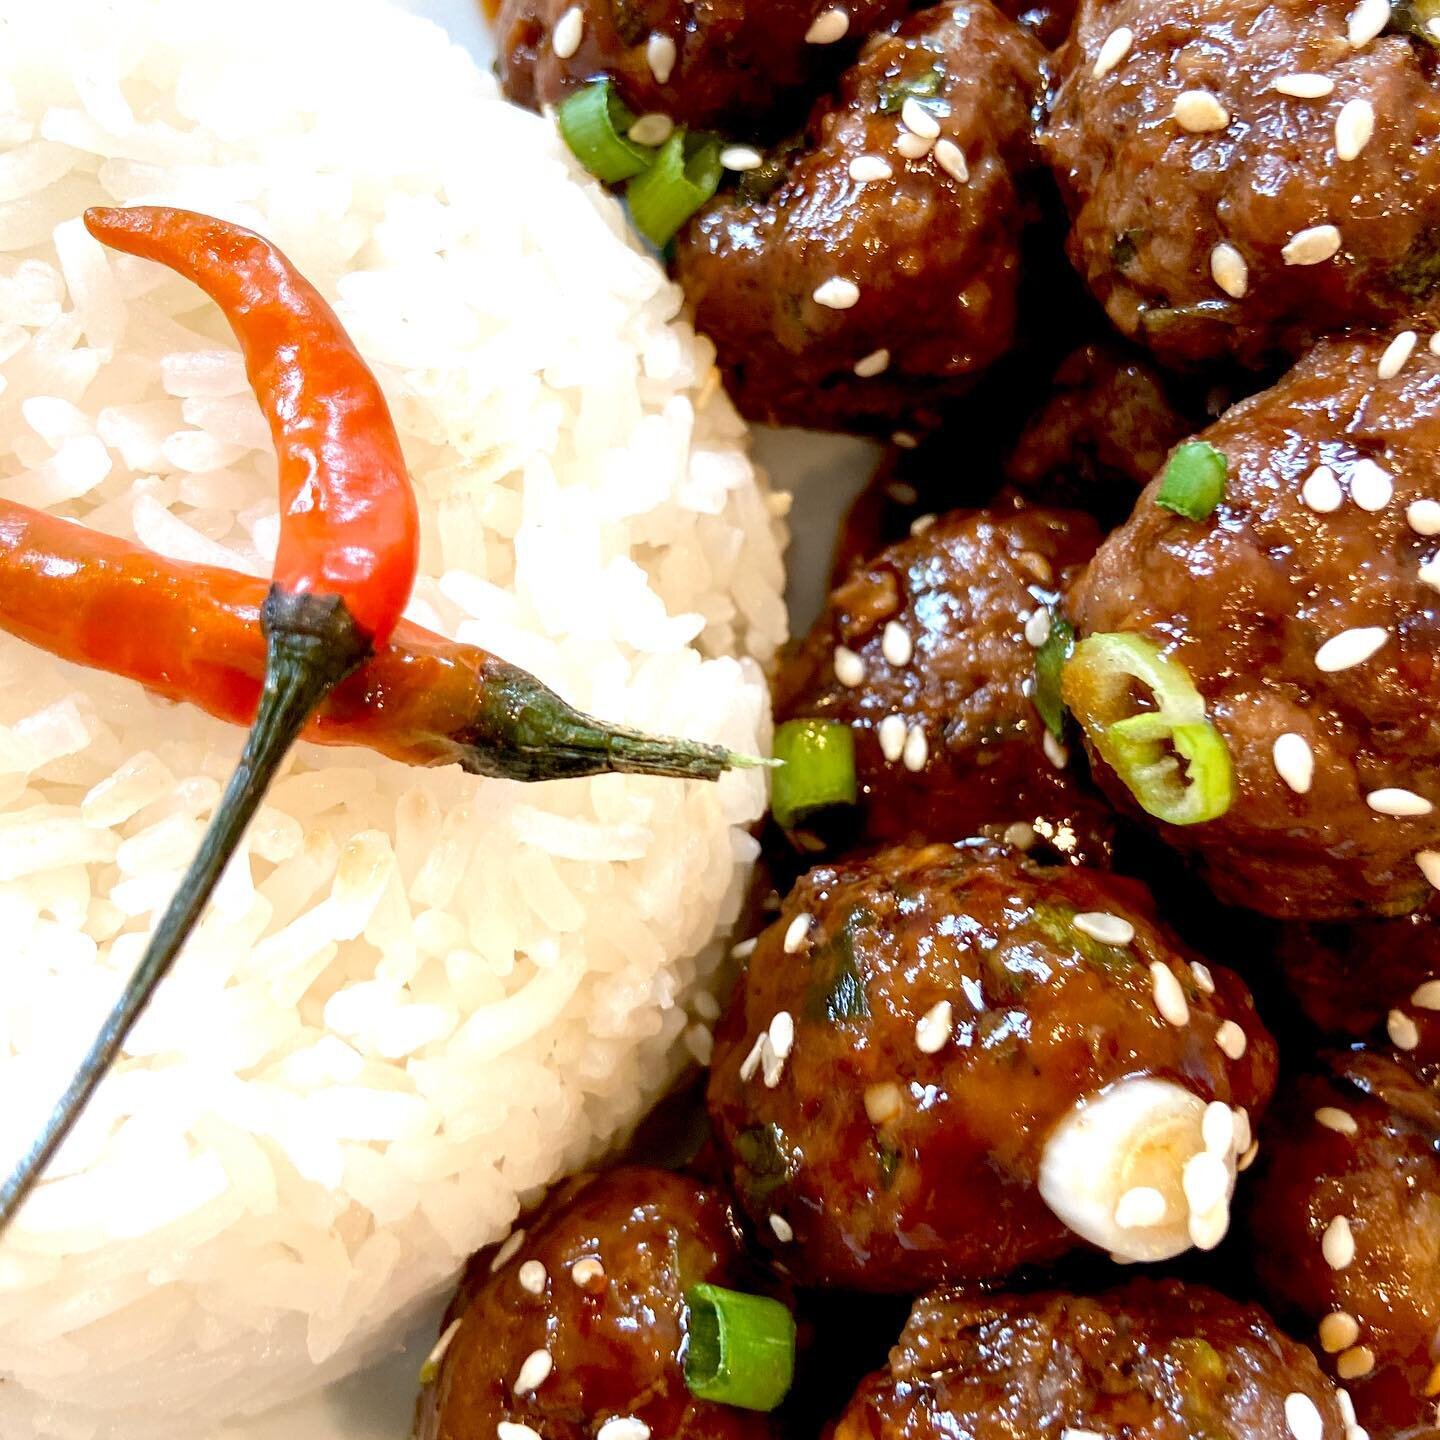 EASY GINGER SCALLION MEATBALLS

This recipe is quick and easy, something that you will love now that it is back to school. Try these out, I am sure your family will love them. Recipe is from @allthehealthythings
&bull;⁣
&bull;⁣
&bull;⁣
&bull;⁣
&bull;